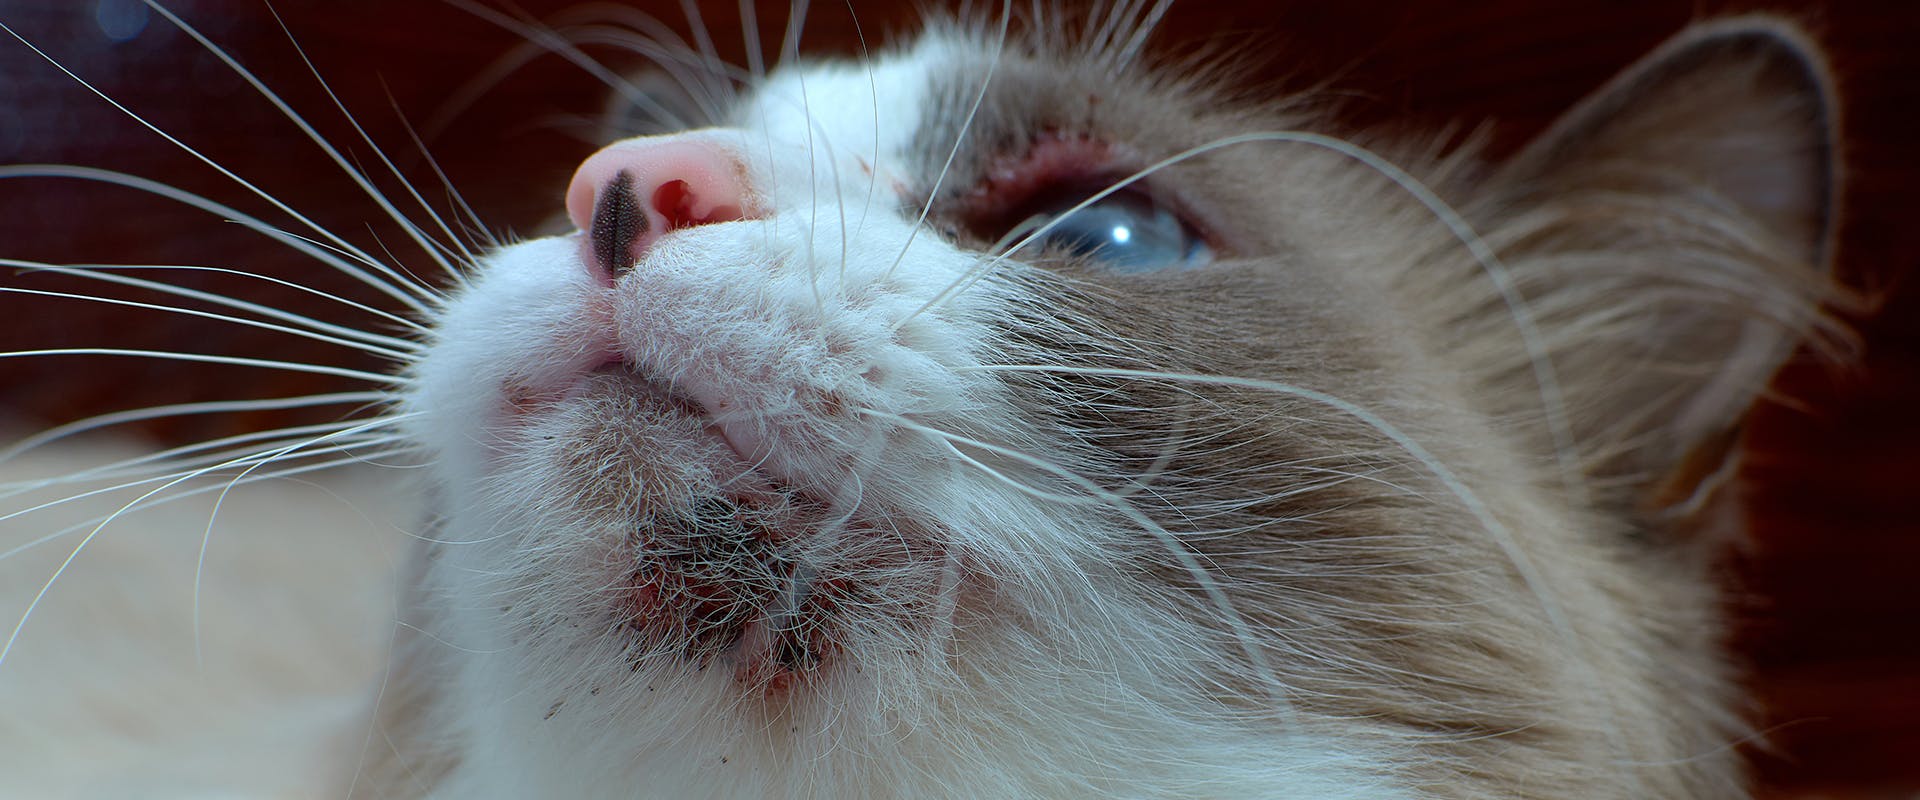 A close-up of a cat with cat chin acne